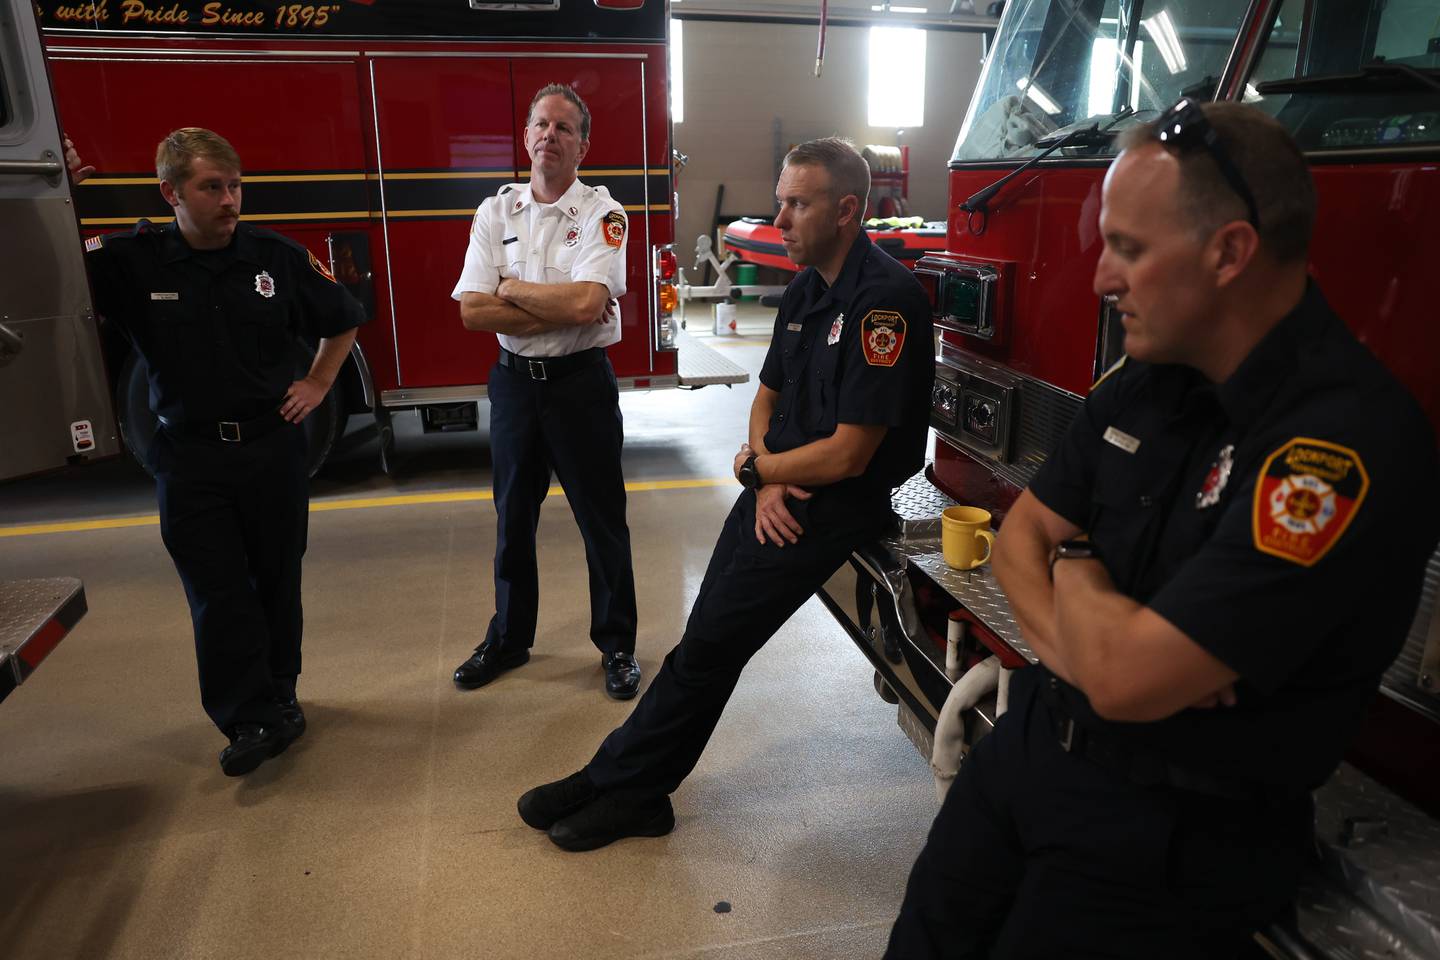 Lockport Firefighter Paramedic’s Josh Blaskey, Lieutenant James Kozek, Jeff Young and Bill Scholtes talk about share their experiences when out on overdose calls. Wednesday, July 6, 2022 in Lockport.